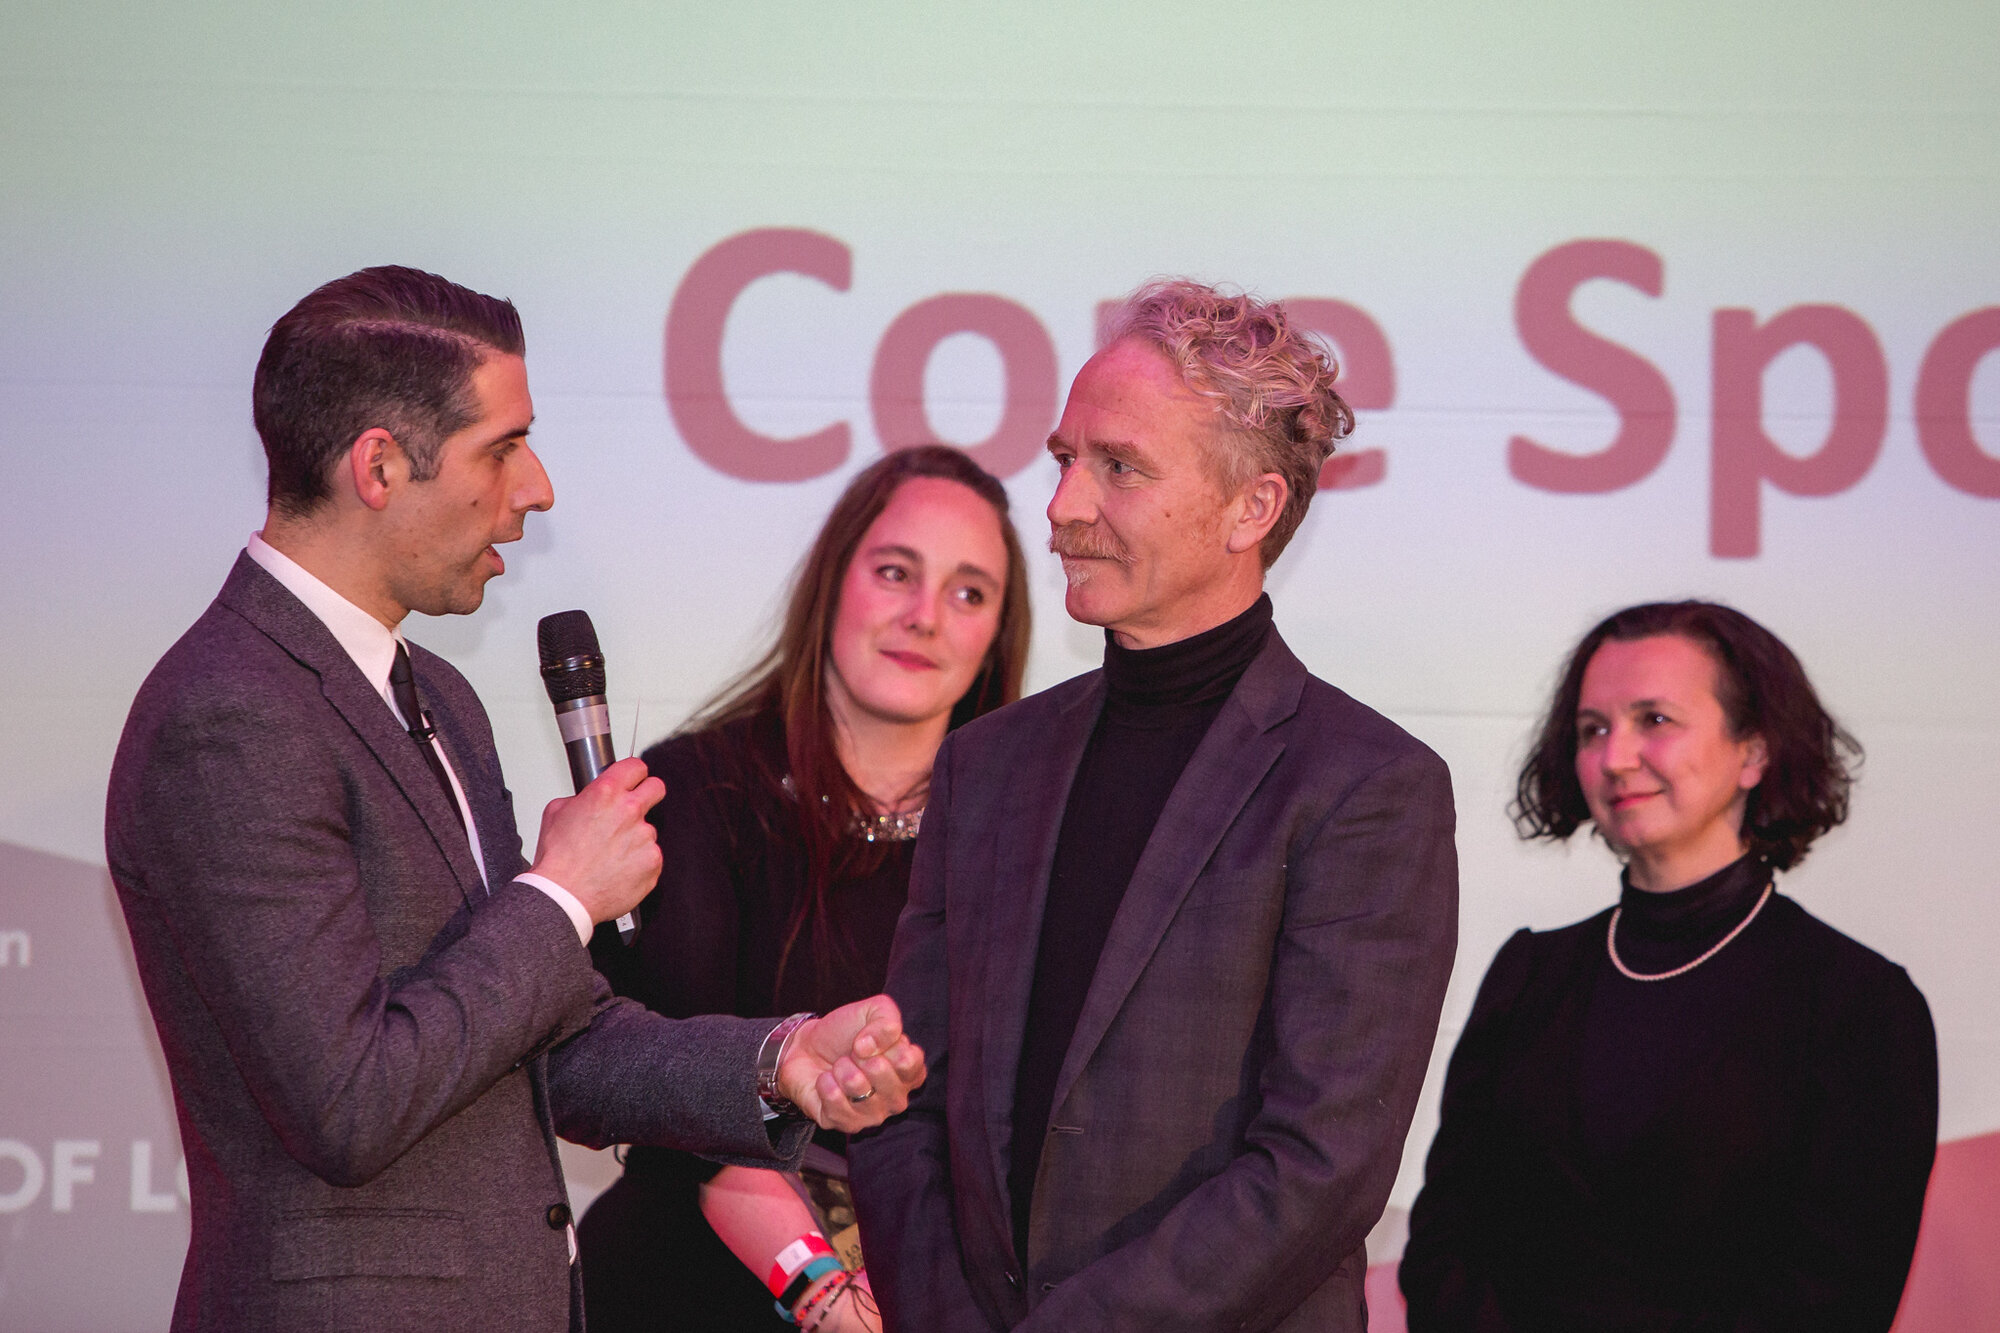 Core Sport - Club of the Year 2018